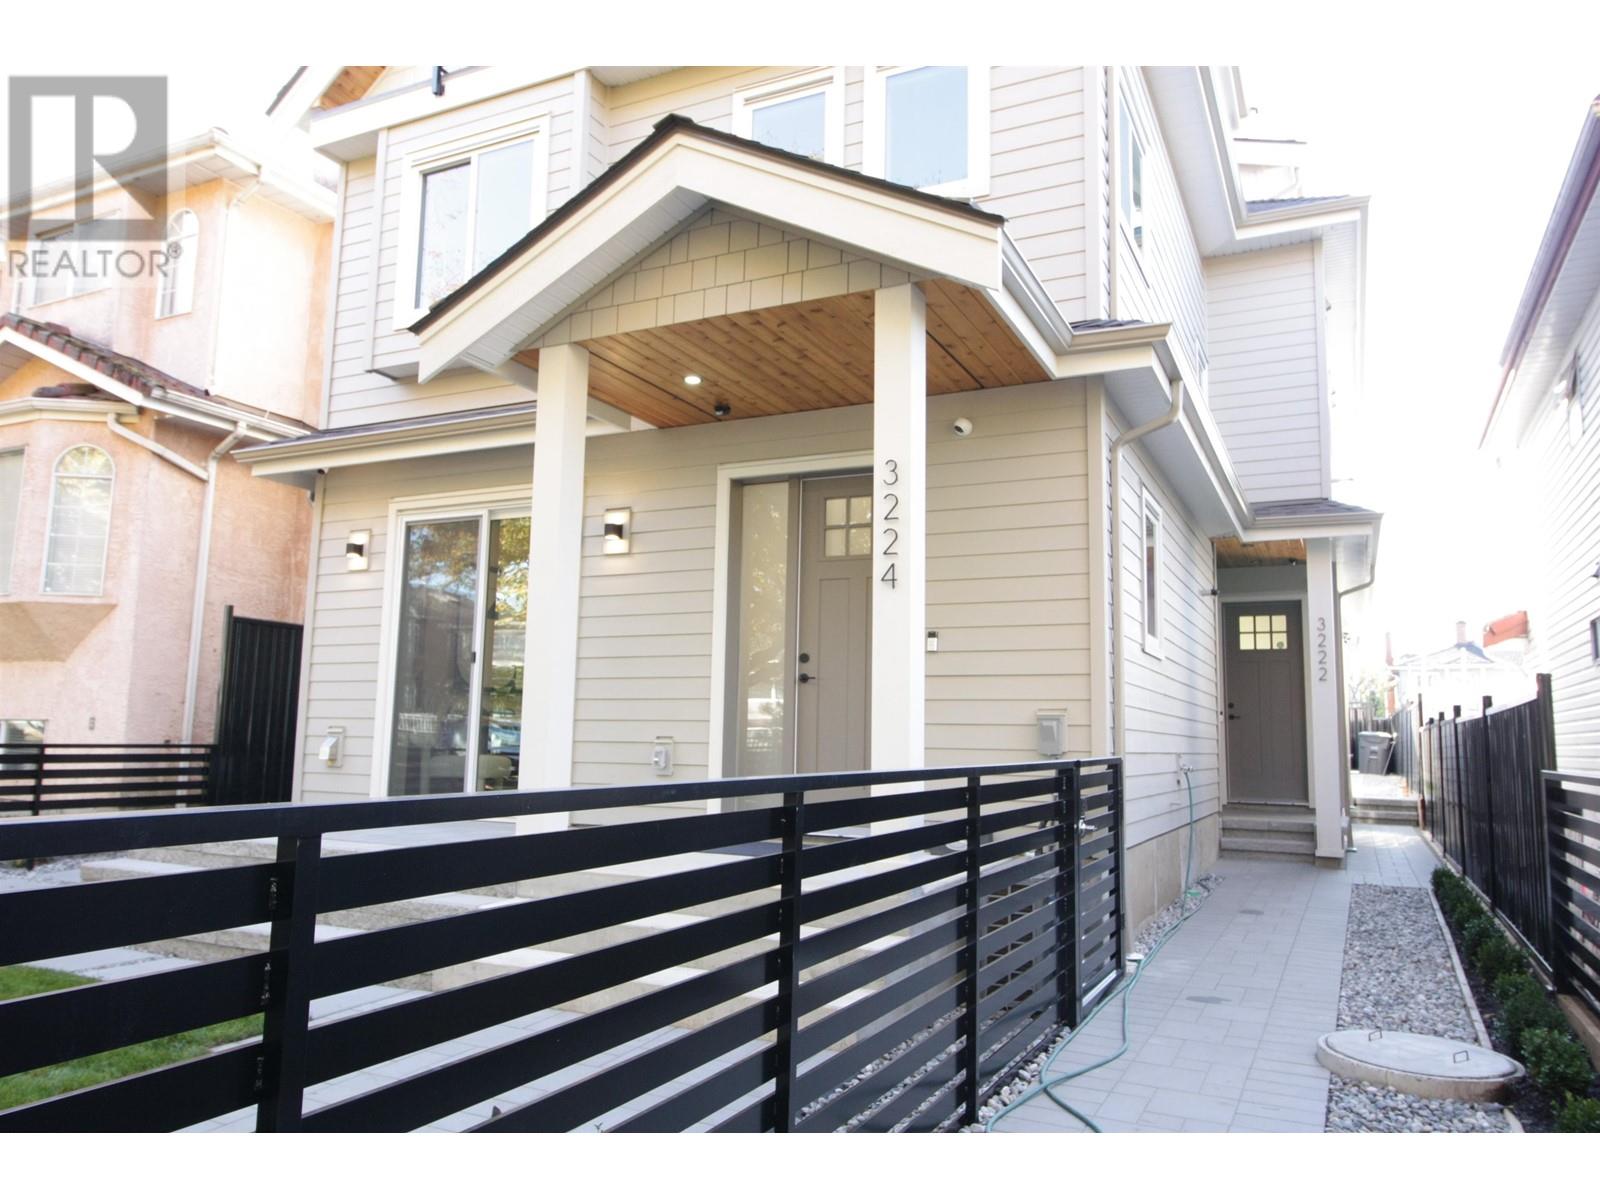 Listing Picture 3 of 39 : 3224 E 27TH AVENUE, Vancouver / 溫哥華 - 魯藝地產 Yvonne Lu Group - MLS Medallion Club Member